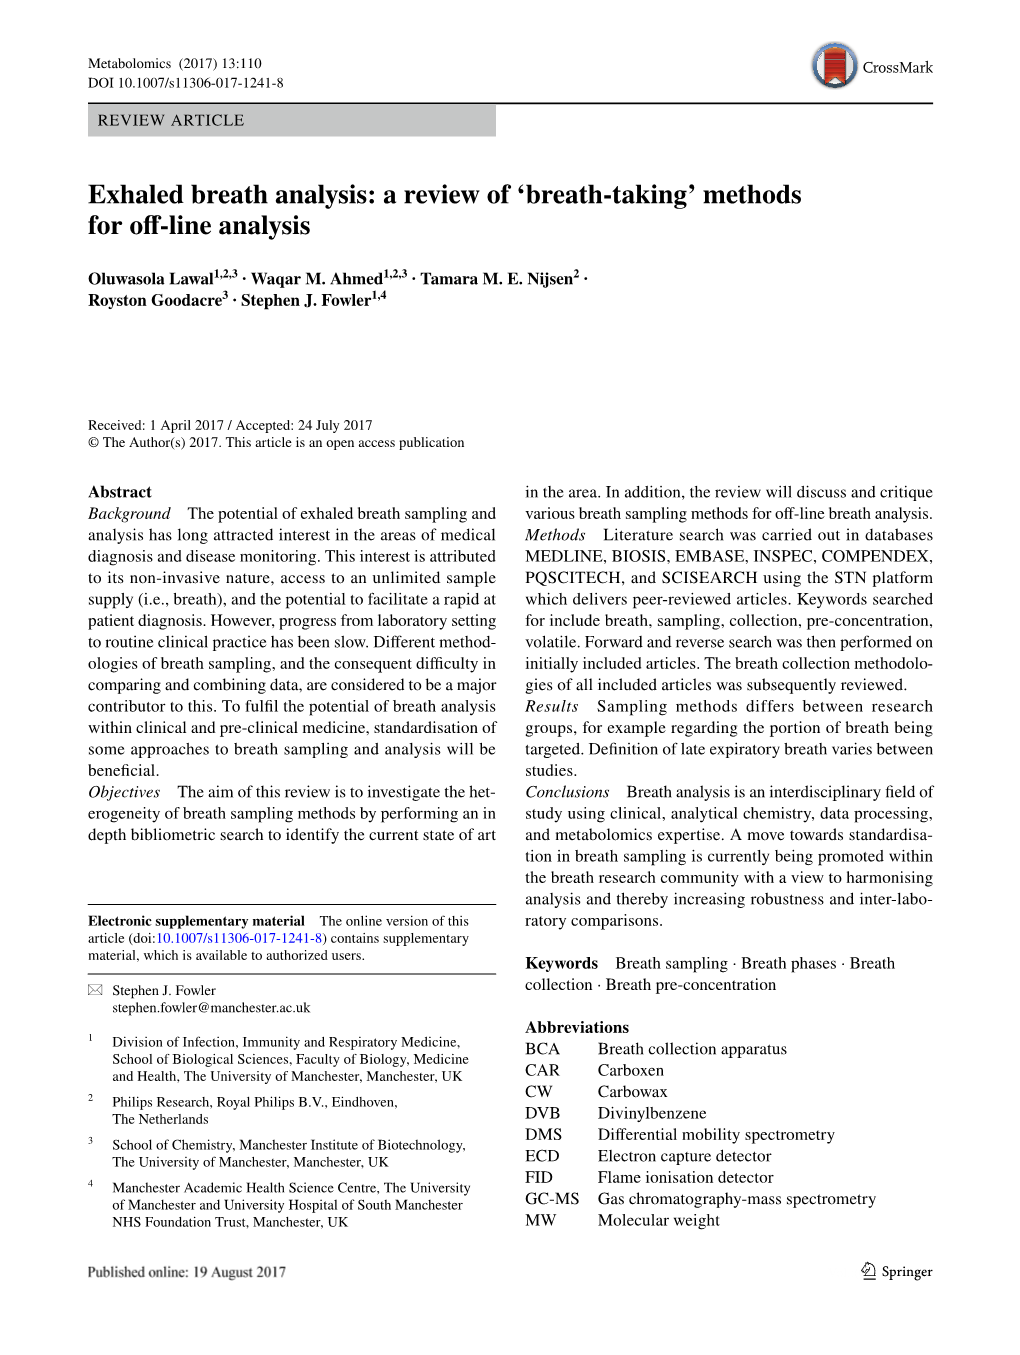 Exhaled Breath Analysis: a Review of ‘Breath-Taking’ Methods for Off-Line Analysis